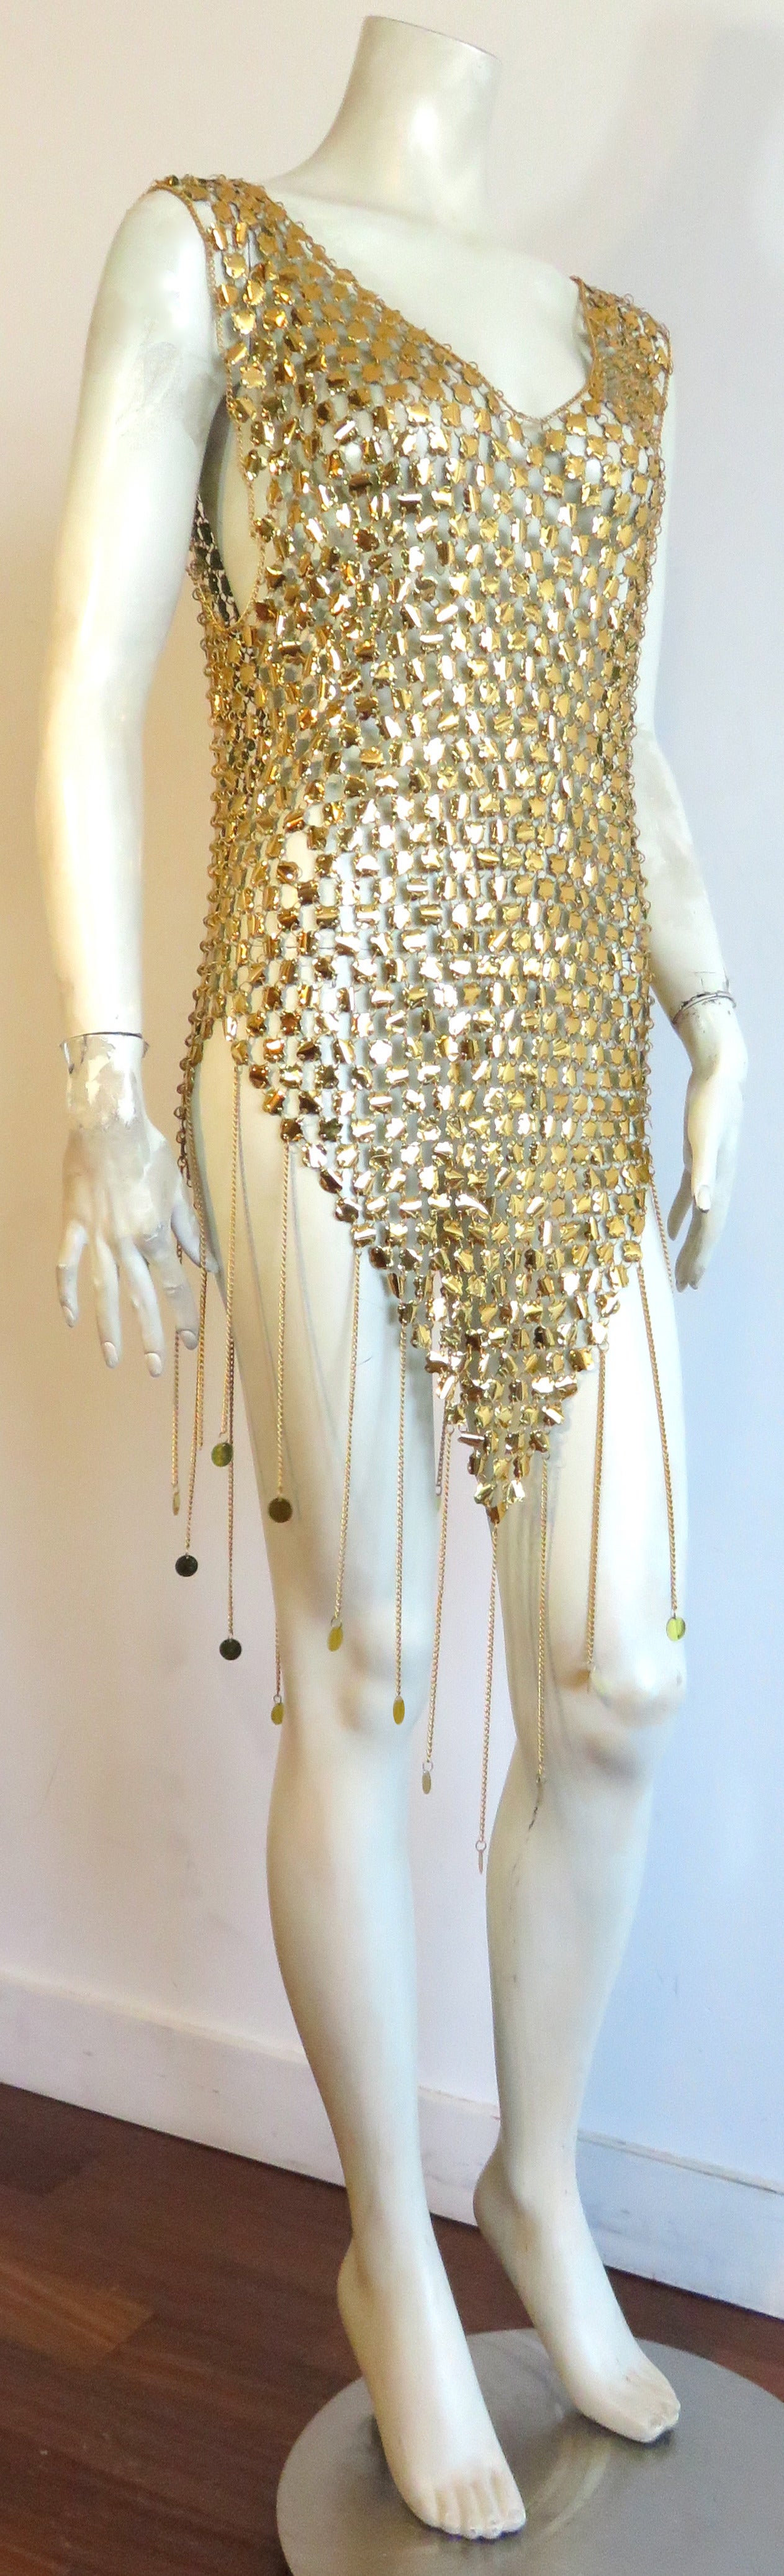 Excellent condition, 1970's metallic poolside/beachwear 'cover-up' tunic.

This stunning tunic is made of all-over, gold-foil coated PU paillettes .  Each paillette is linked together at the edges with small metal rings.  The neckline, and